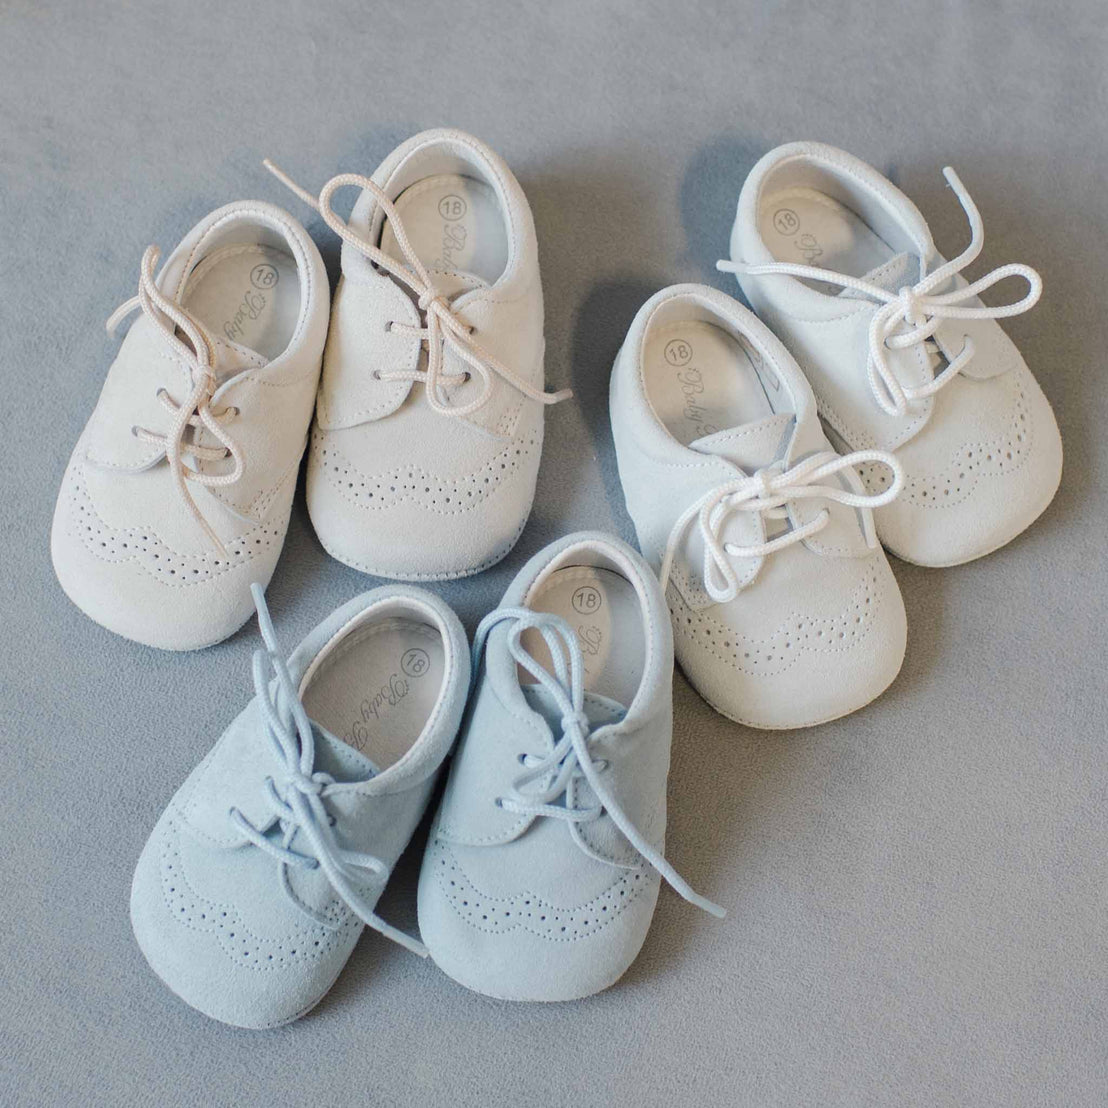 A photo of three pairs of Ezra Suede Shoes. These are available in three colors: tan, sky blue, and dove grey